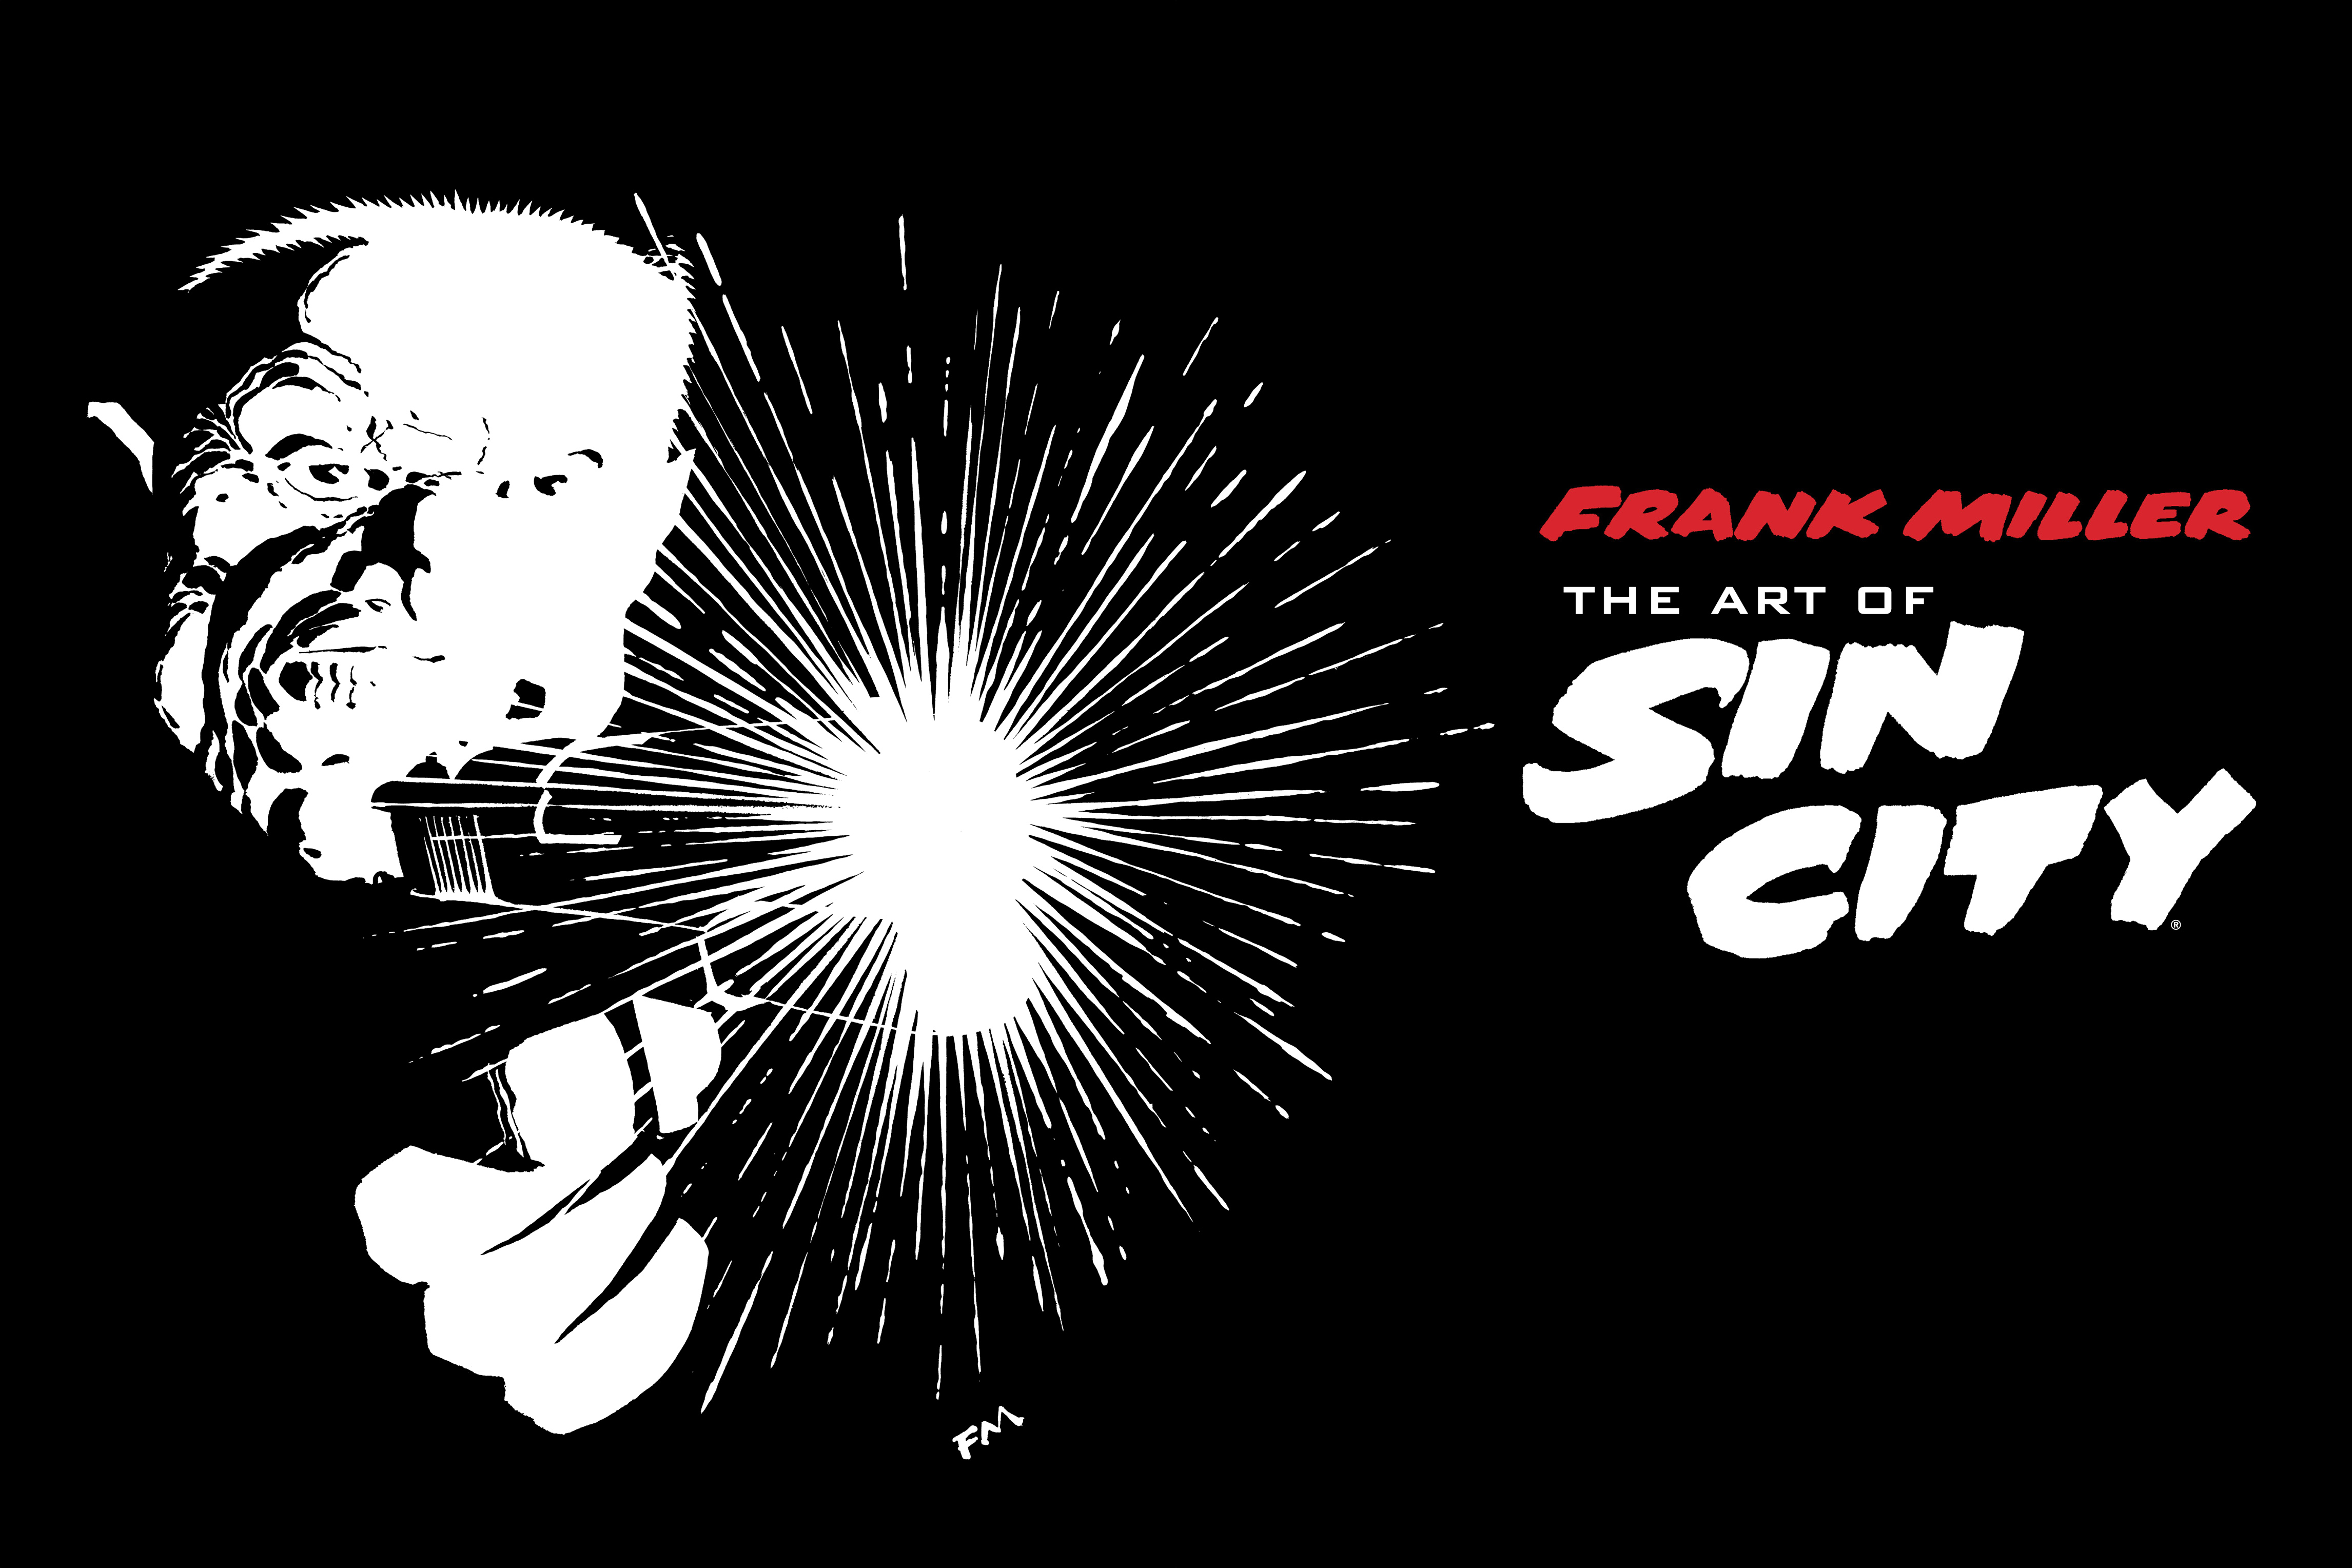 Read online Frank Miller: The Art of Sin City comic -  Issue # TPB - 4